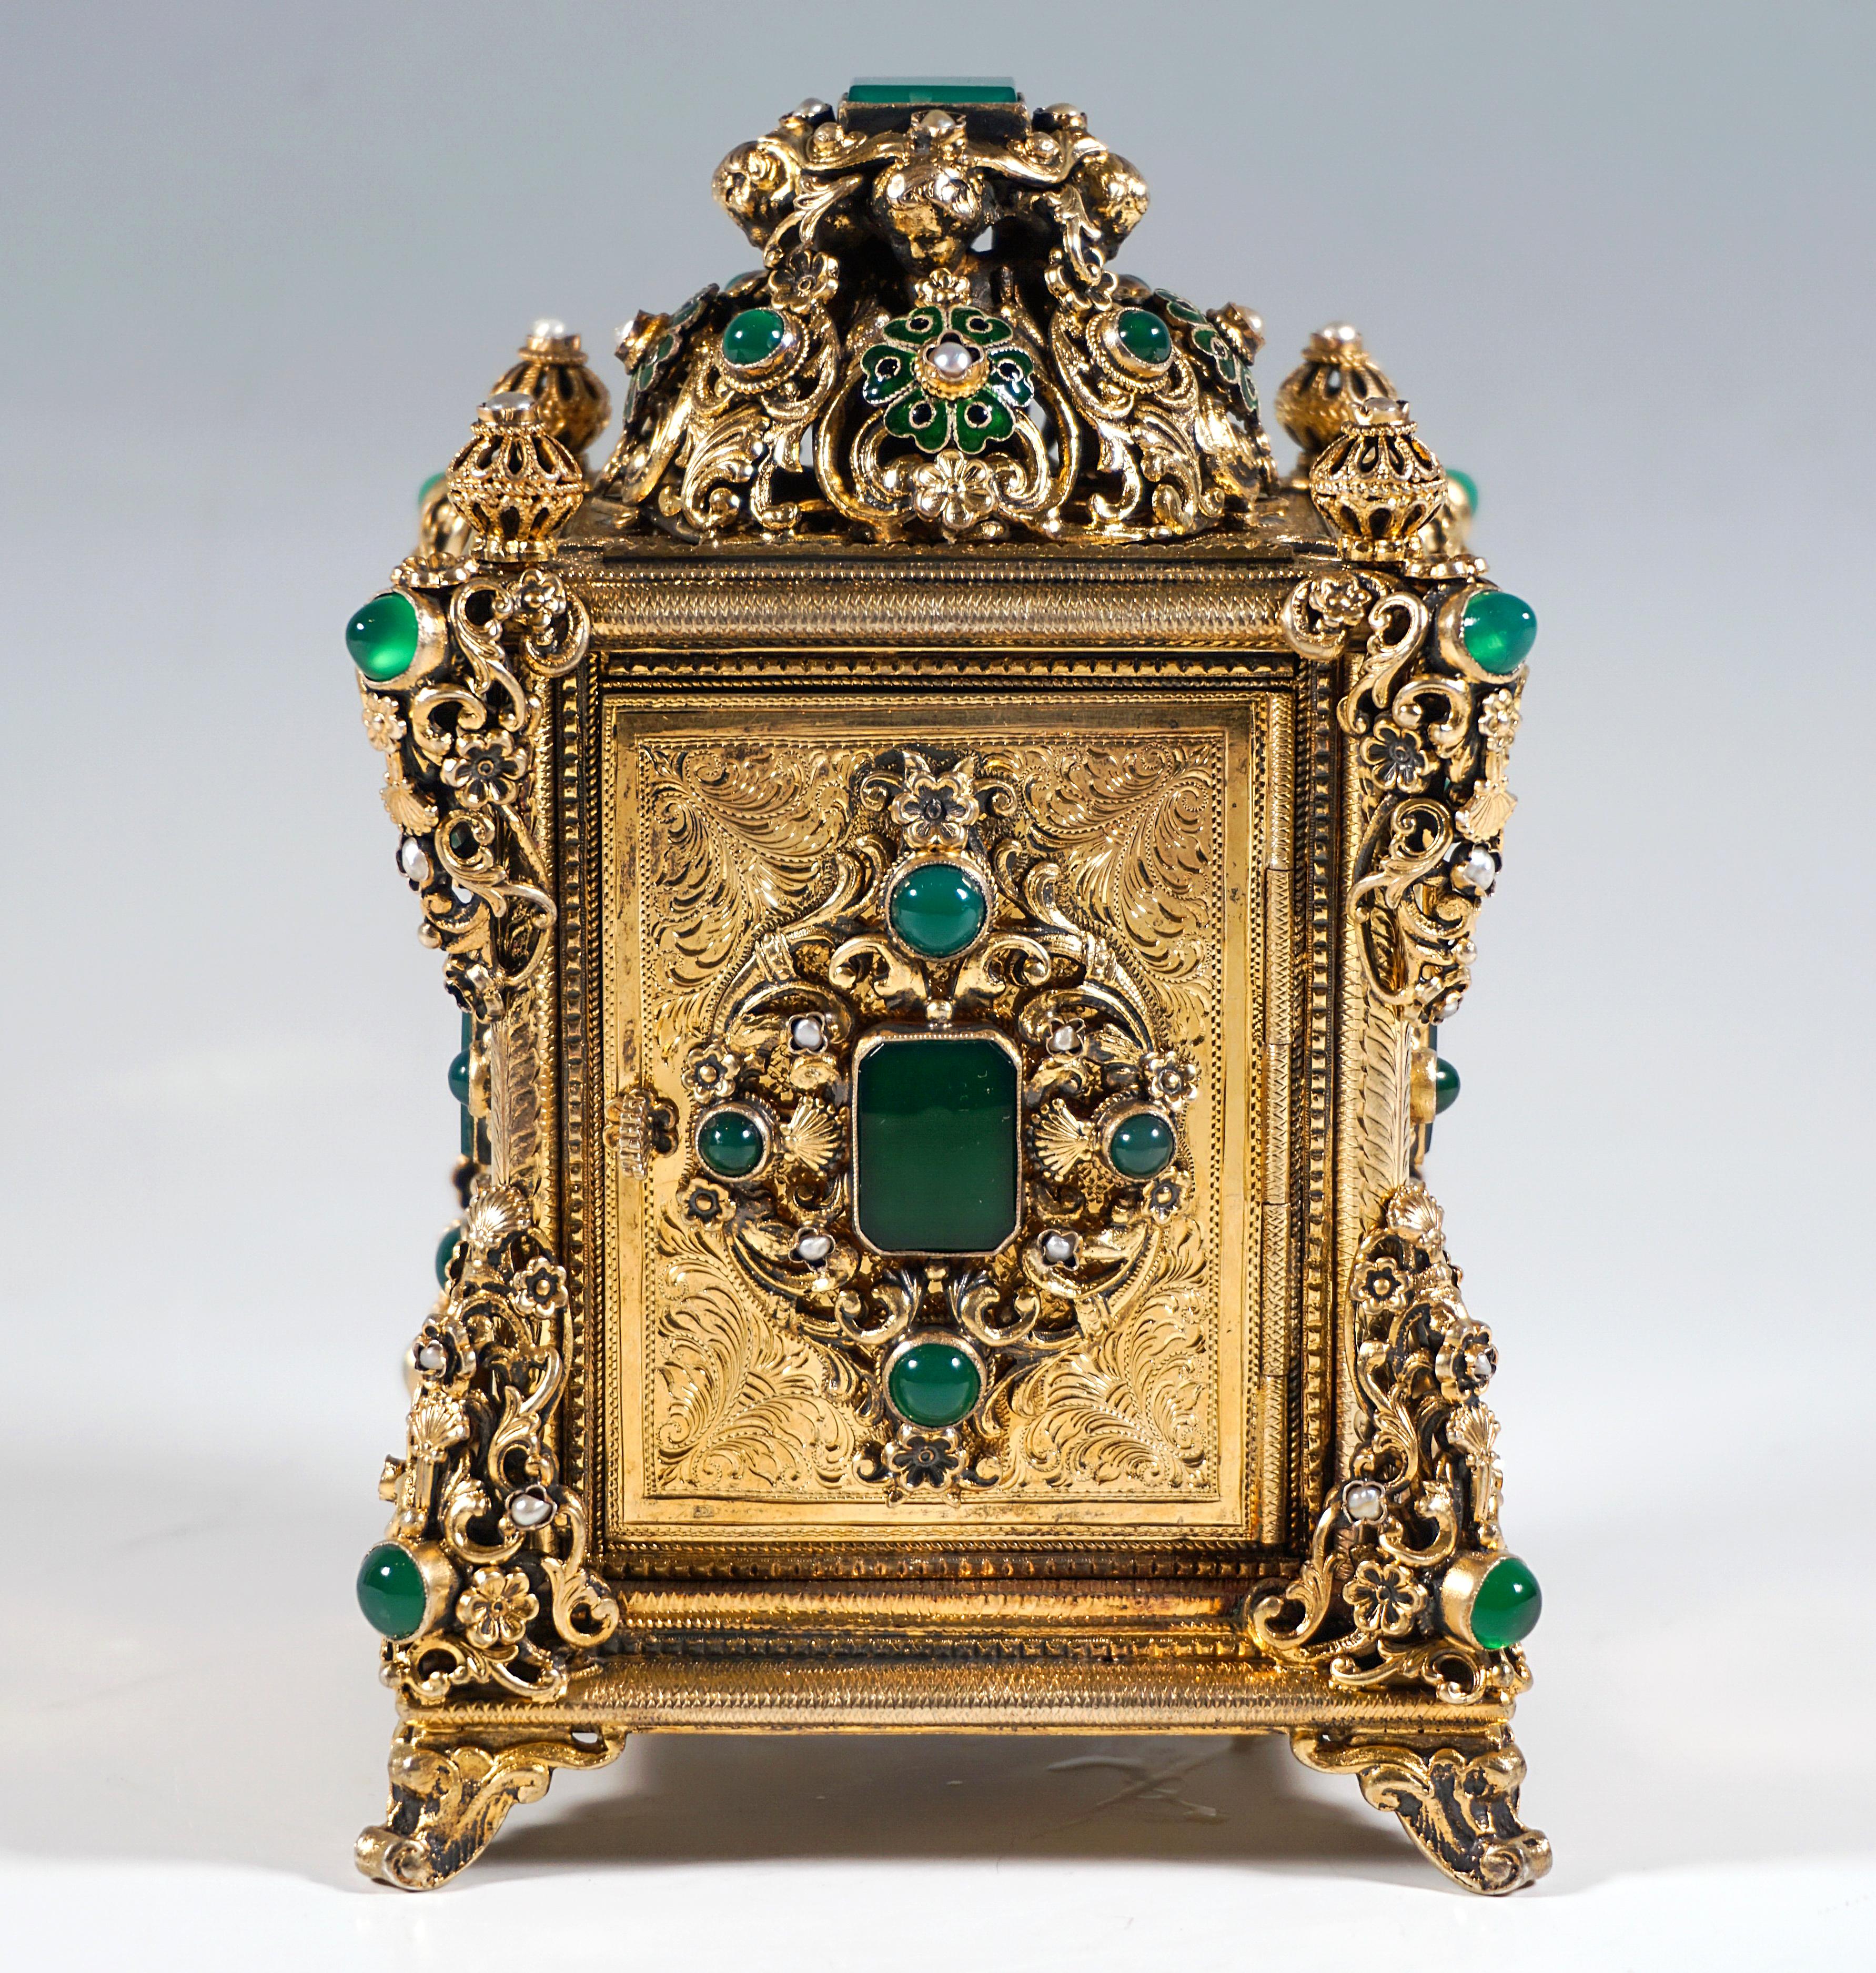 Gold Plate Viennese Gilt Silver Splendid Table Clock With Green Chalcedony Trimming, C 1880